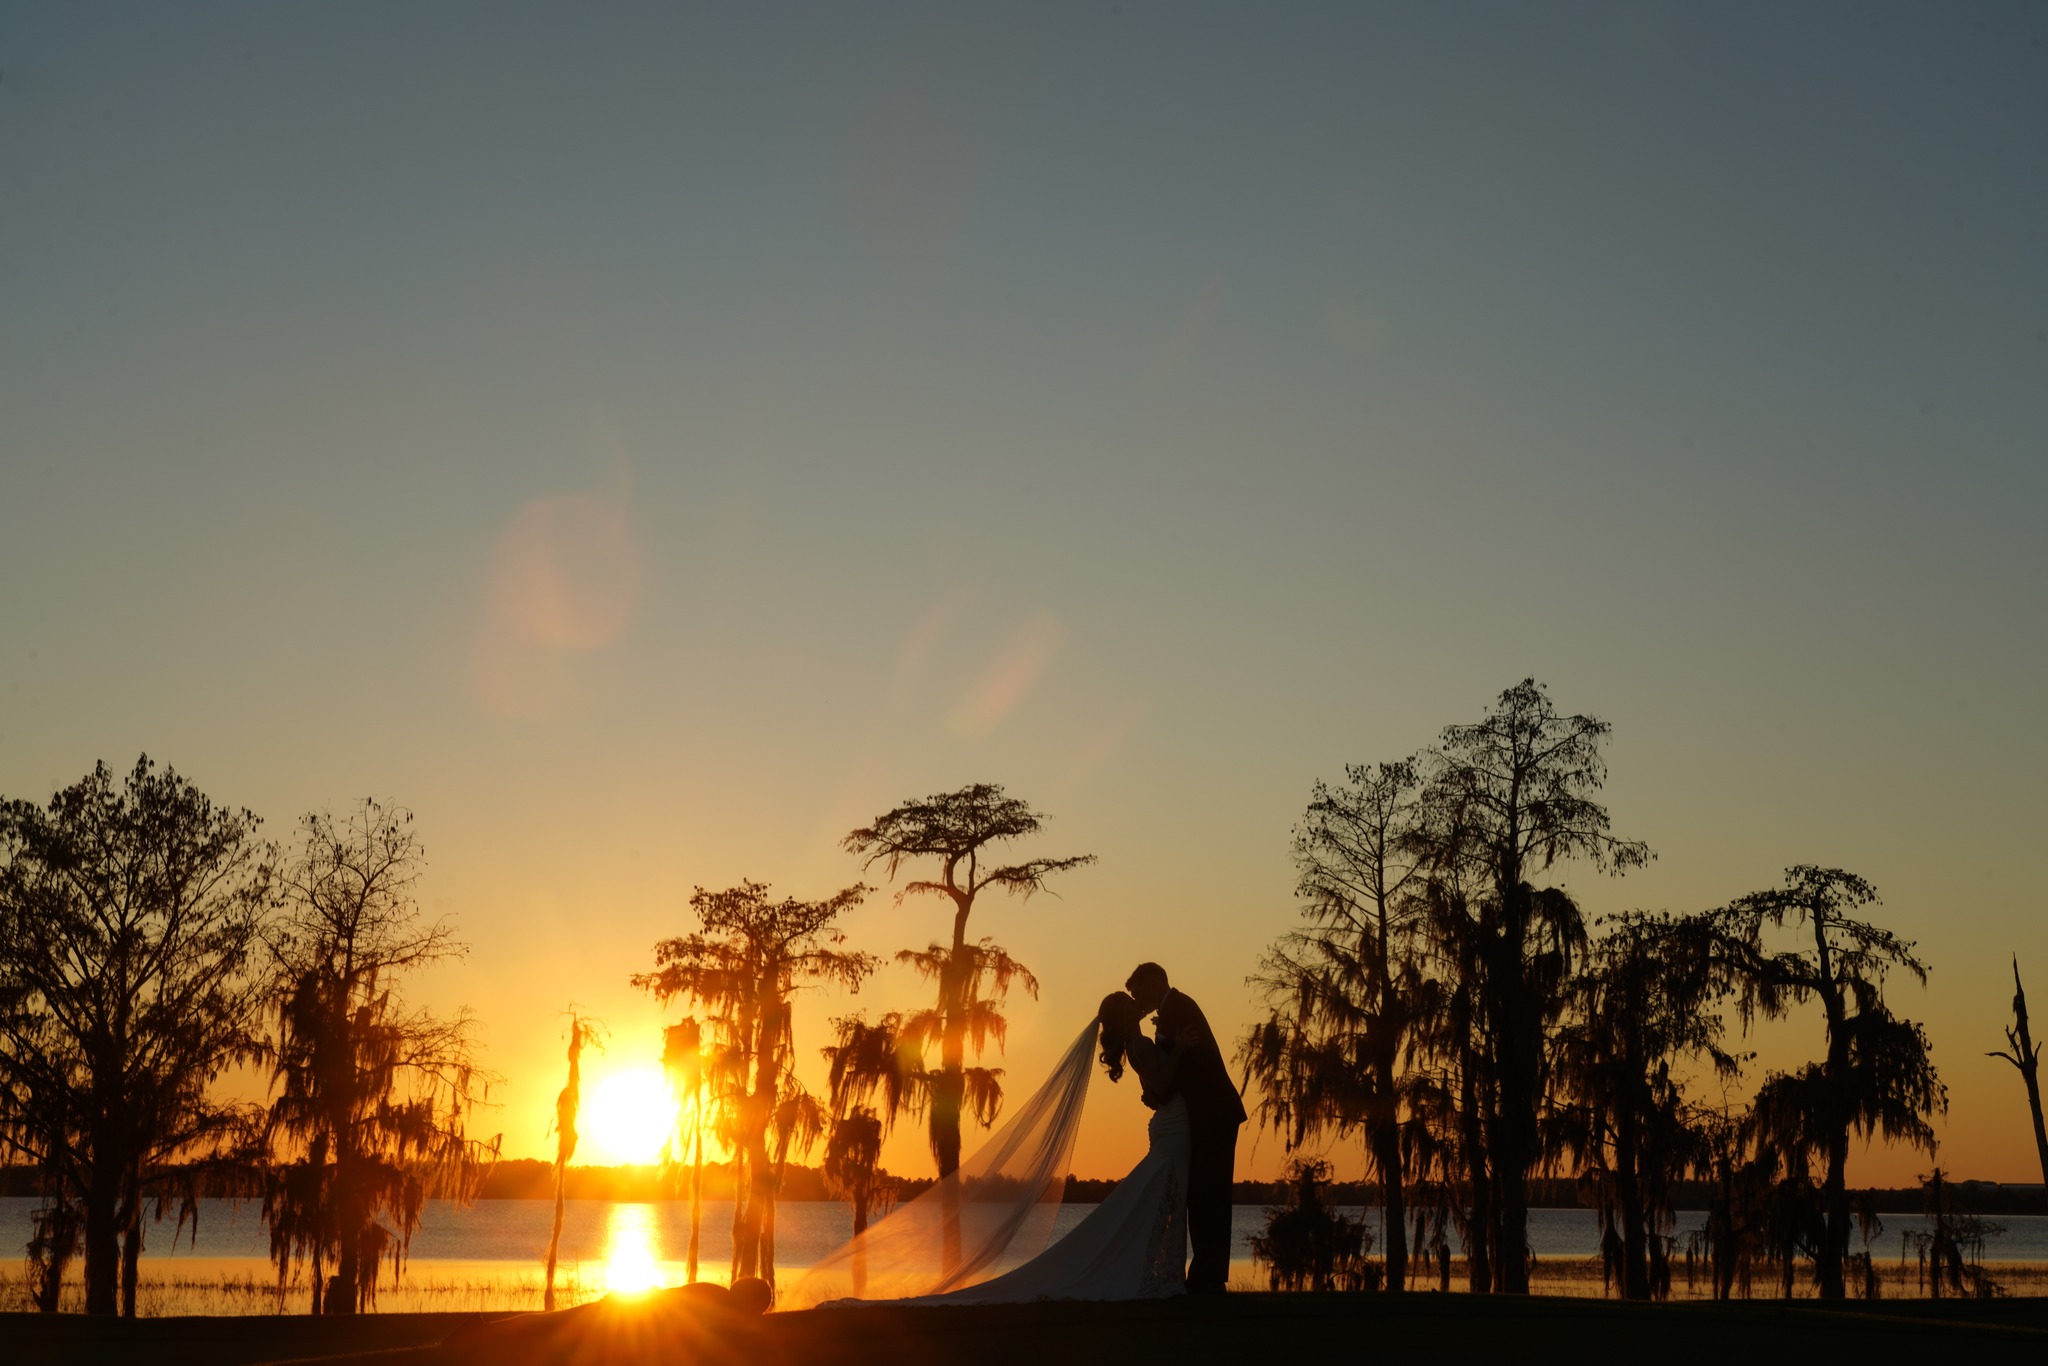 Cici and Sam kiss while silhouetted by the sunset